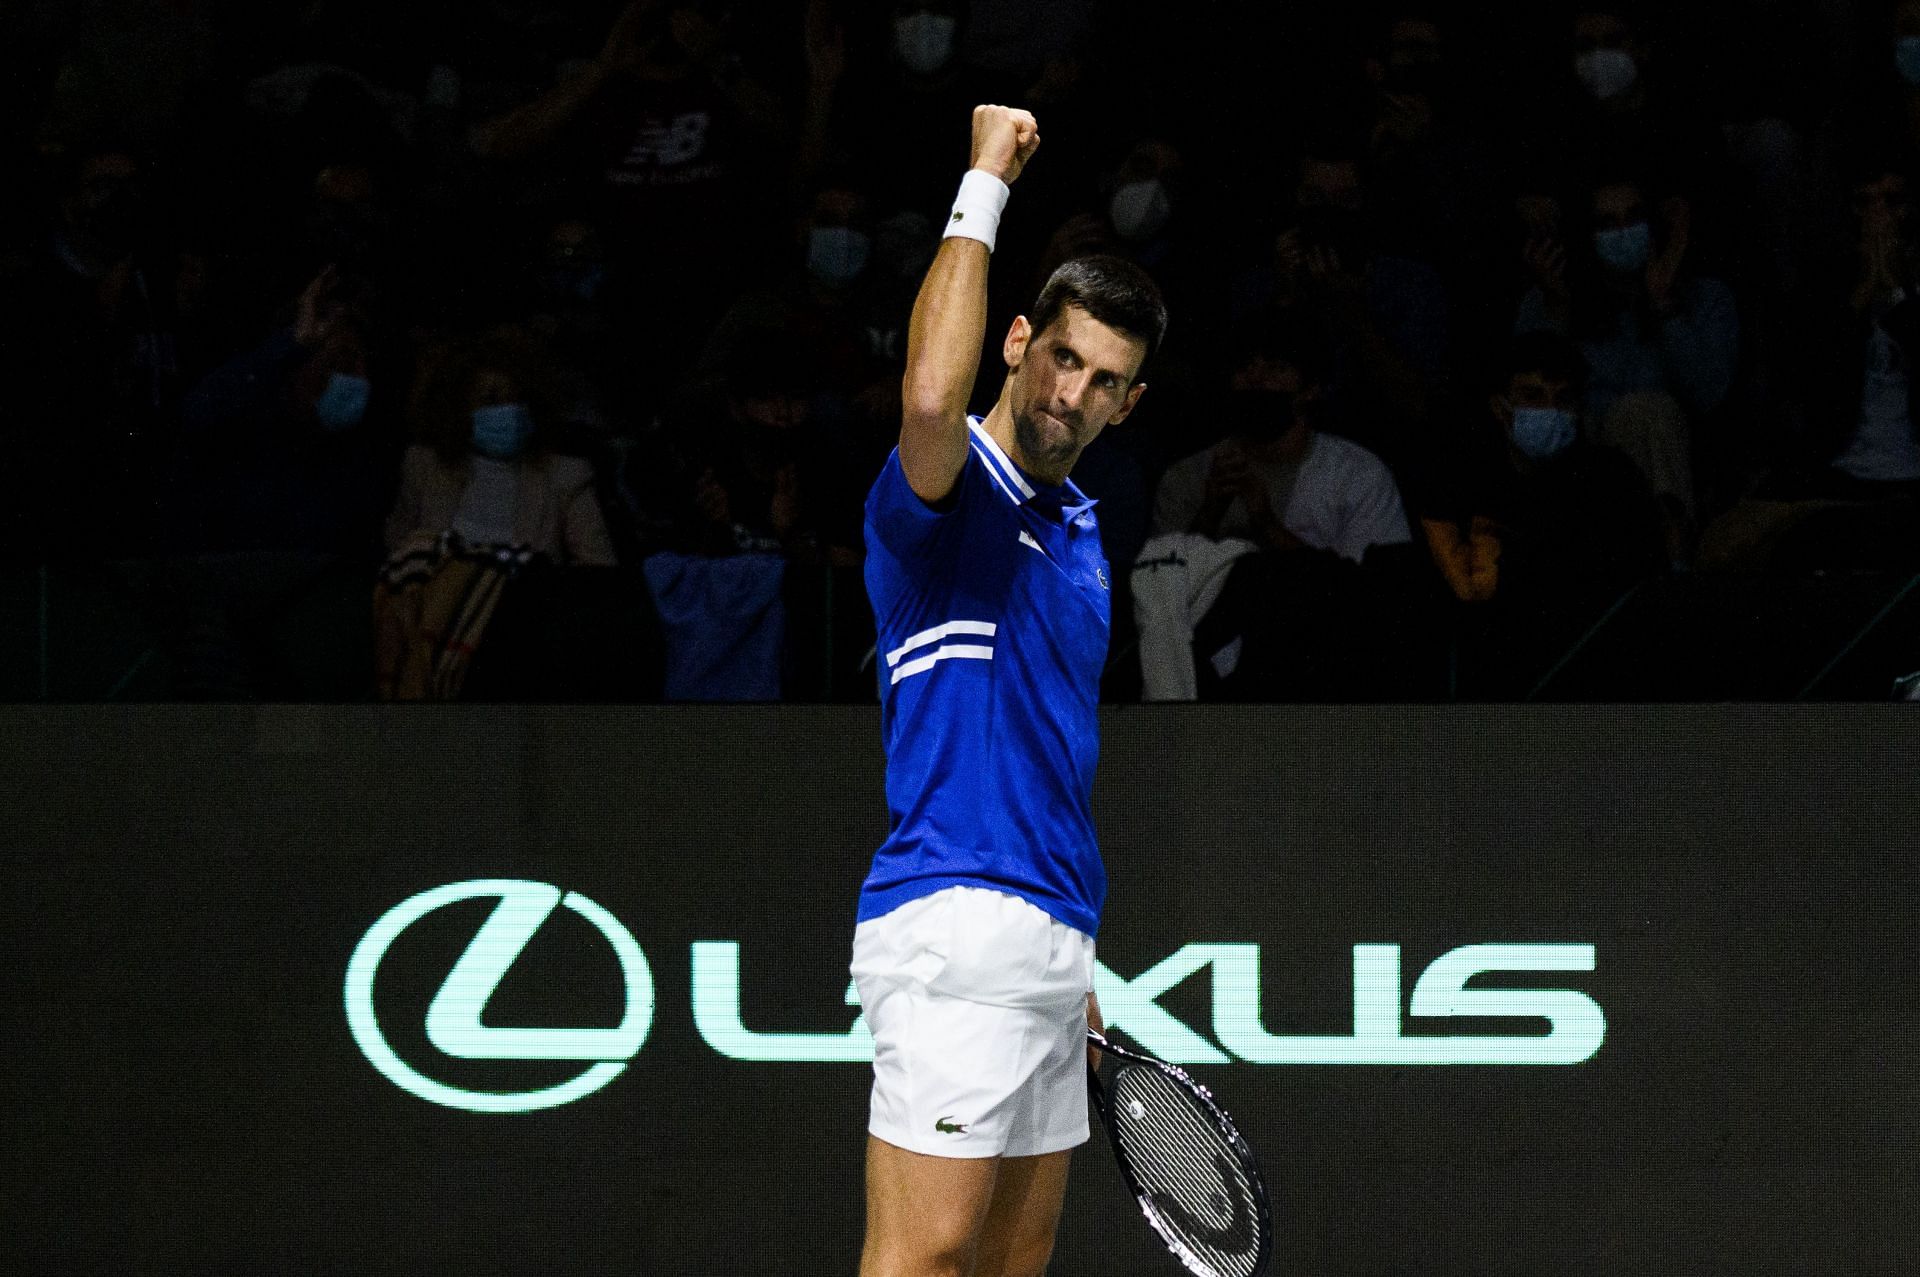 Djokovic is yet to arrive in Australia for the ATP Cup